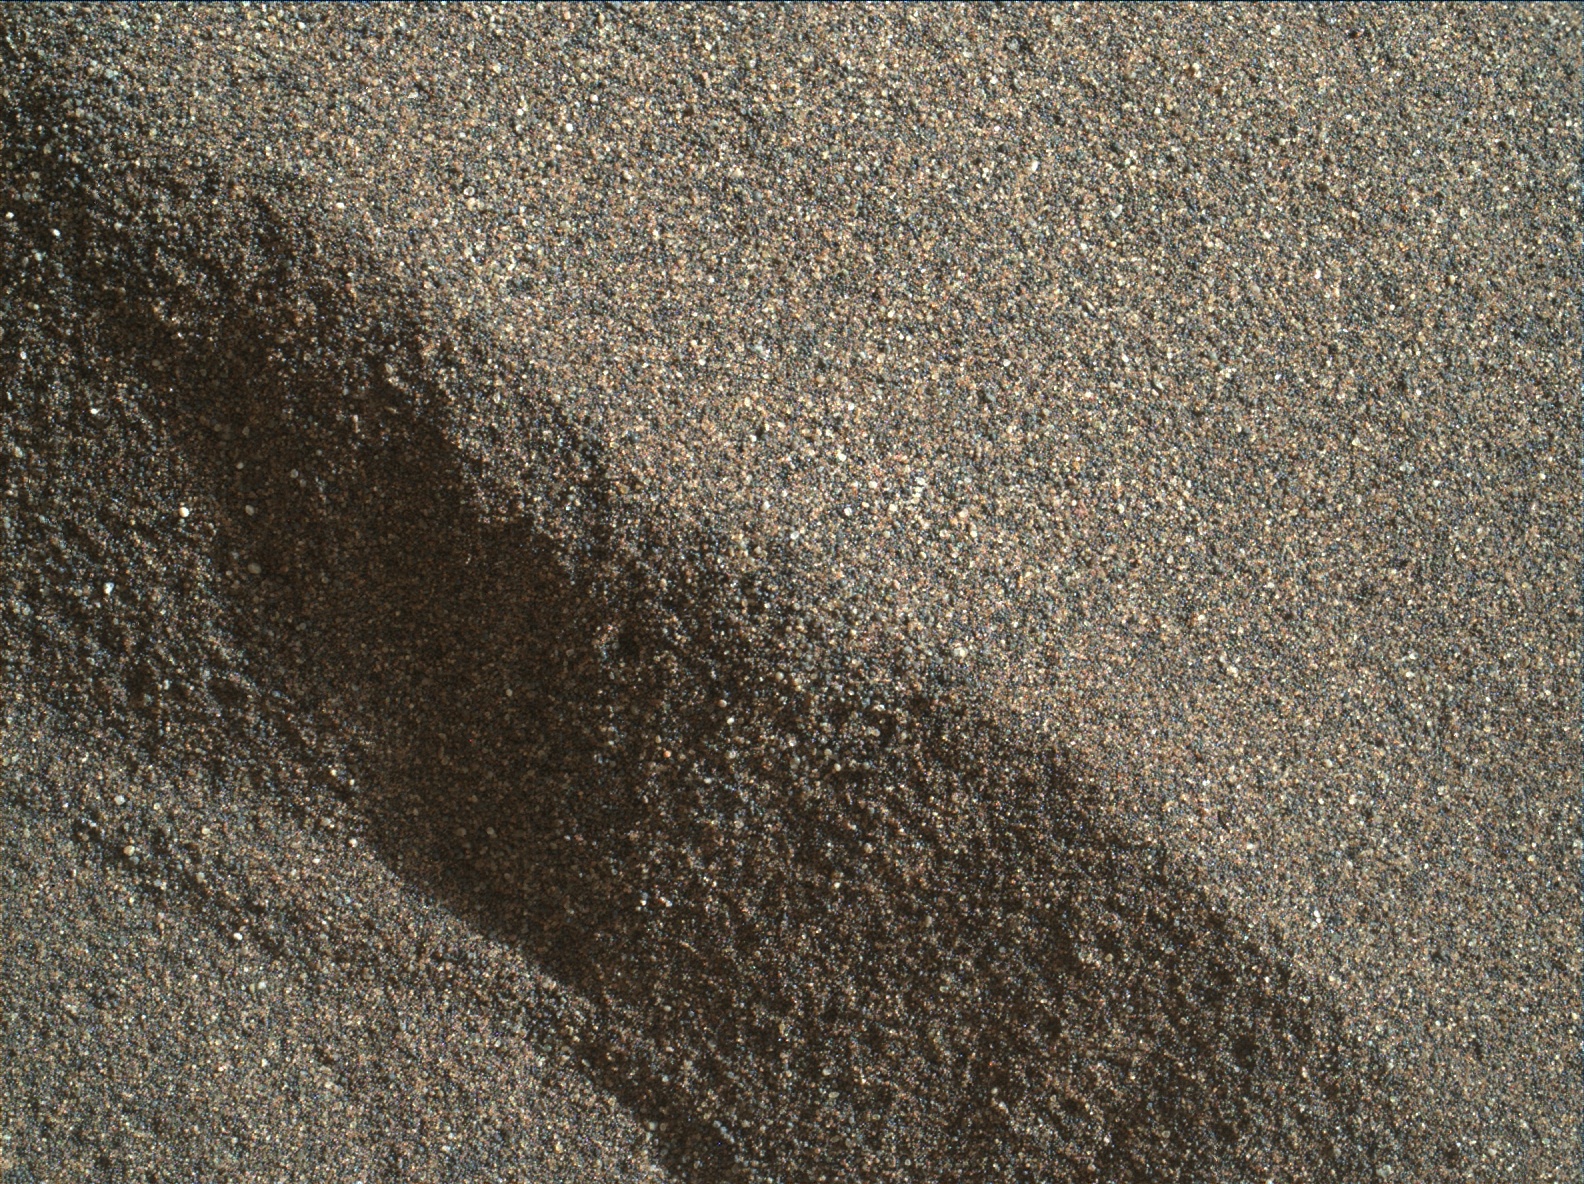 Nasa's Mars rover Curiosity acquired this image using its Mars Hand Lens Imager (MAHLI) on Sol 1224